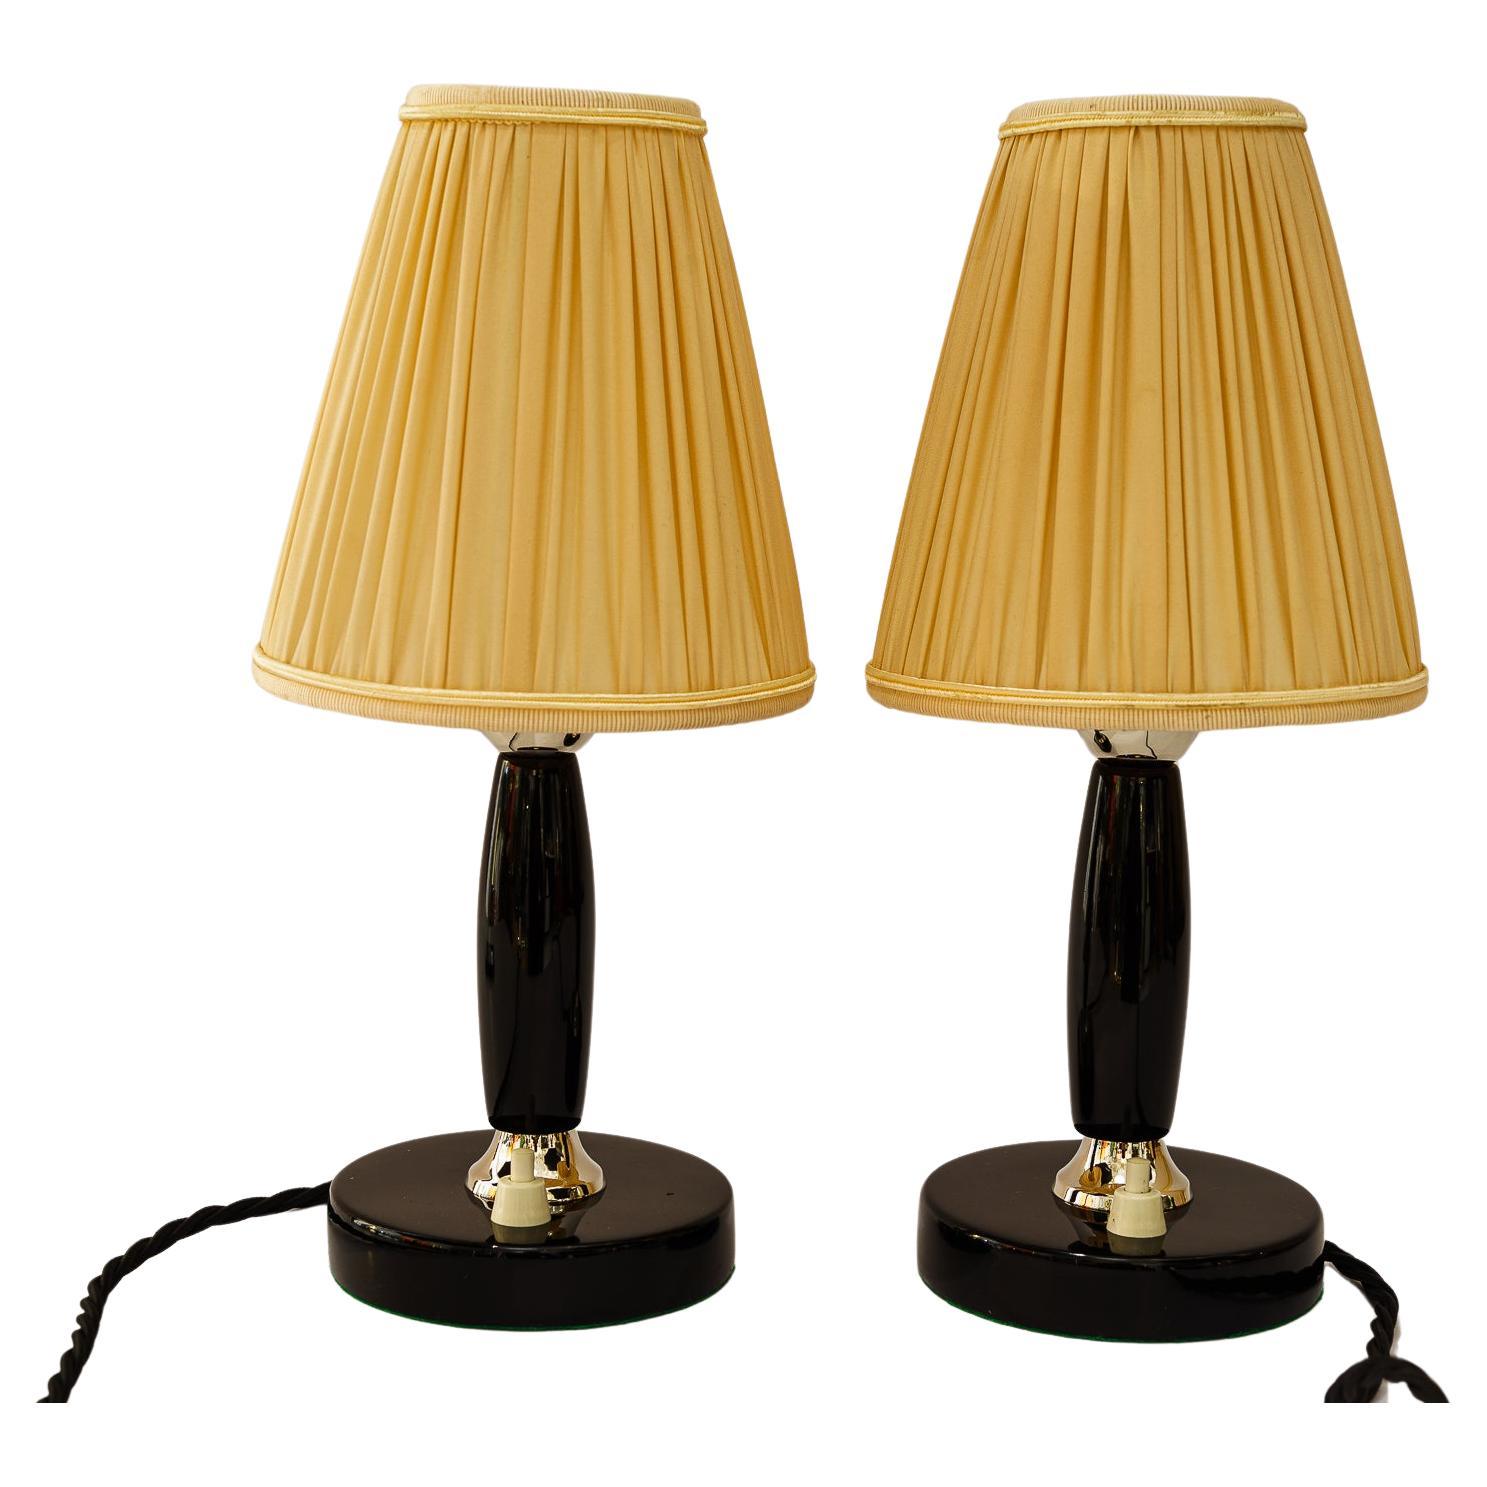 2x Art Deco Table Lamps vienna around 1930s wood polished and fabric shade